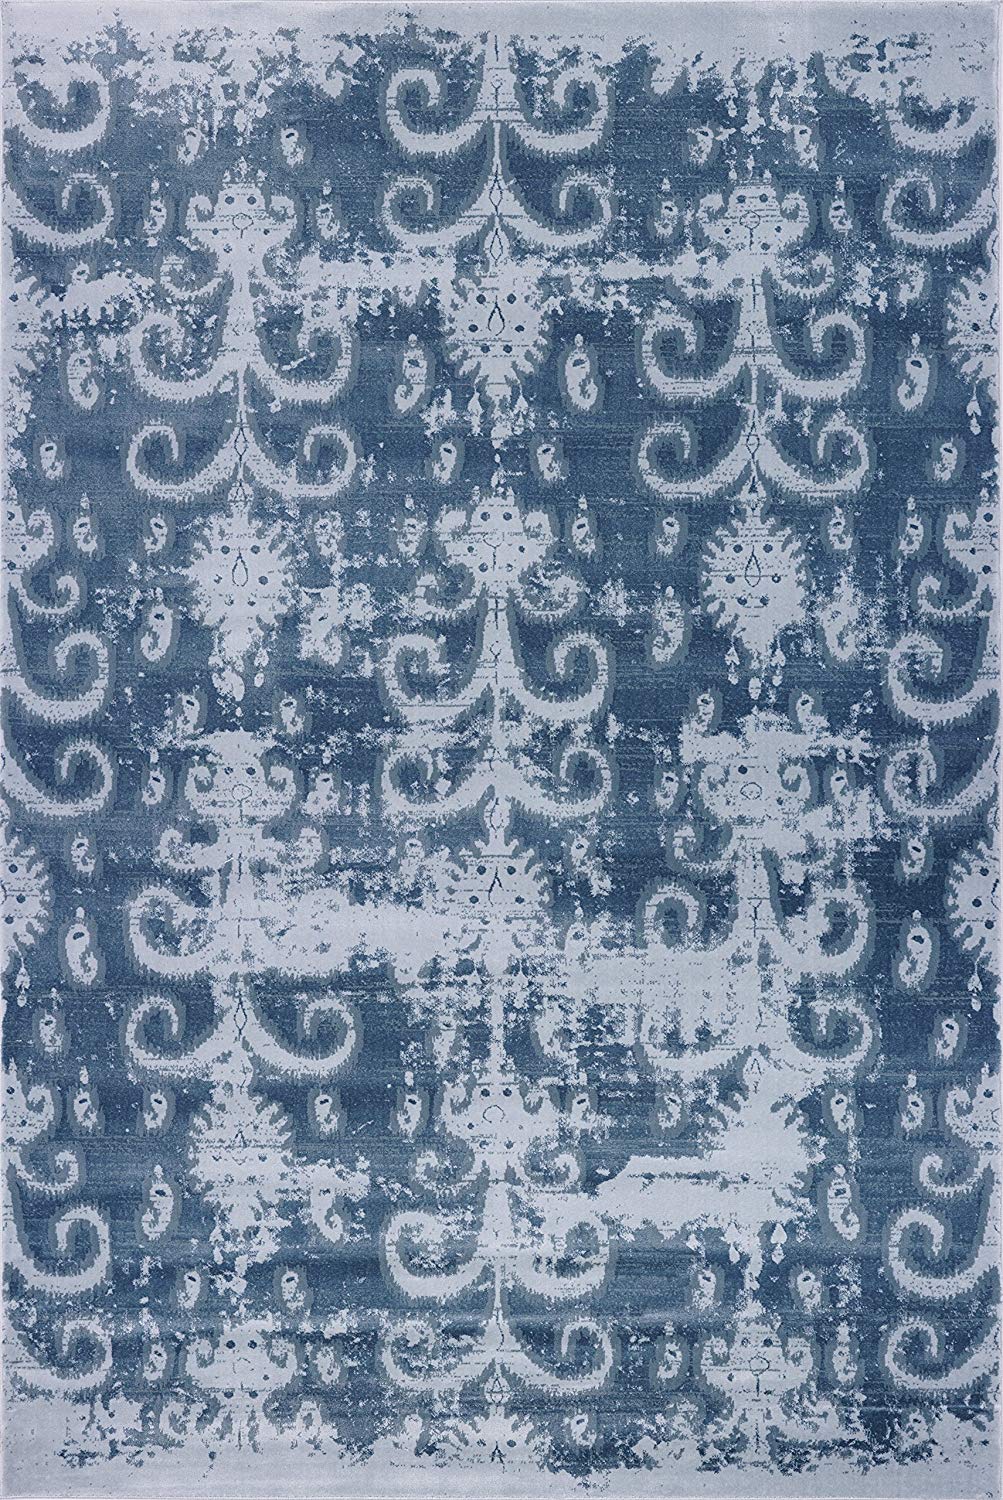 https://pierrecardinrugs.com/cdn/shop/products/area_rugs_8x10_area_rug_5x7_5x8_blue_luxury_bedroom_8x10_clearance_living_room_vintage_gray_grey_traditional_bohemian_kitchen_rugs_for_bedroom_living_room_abstract_rugs_area_patter_1_2a8166e1-2dbf-49c9-aba3-d897558a379f_1024x.jpg?v=1530820438